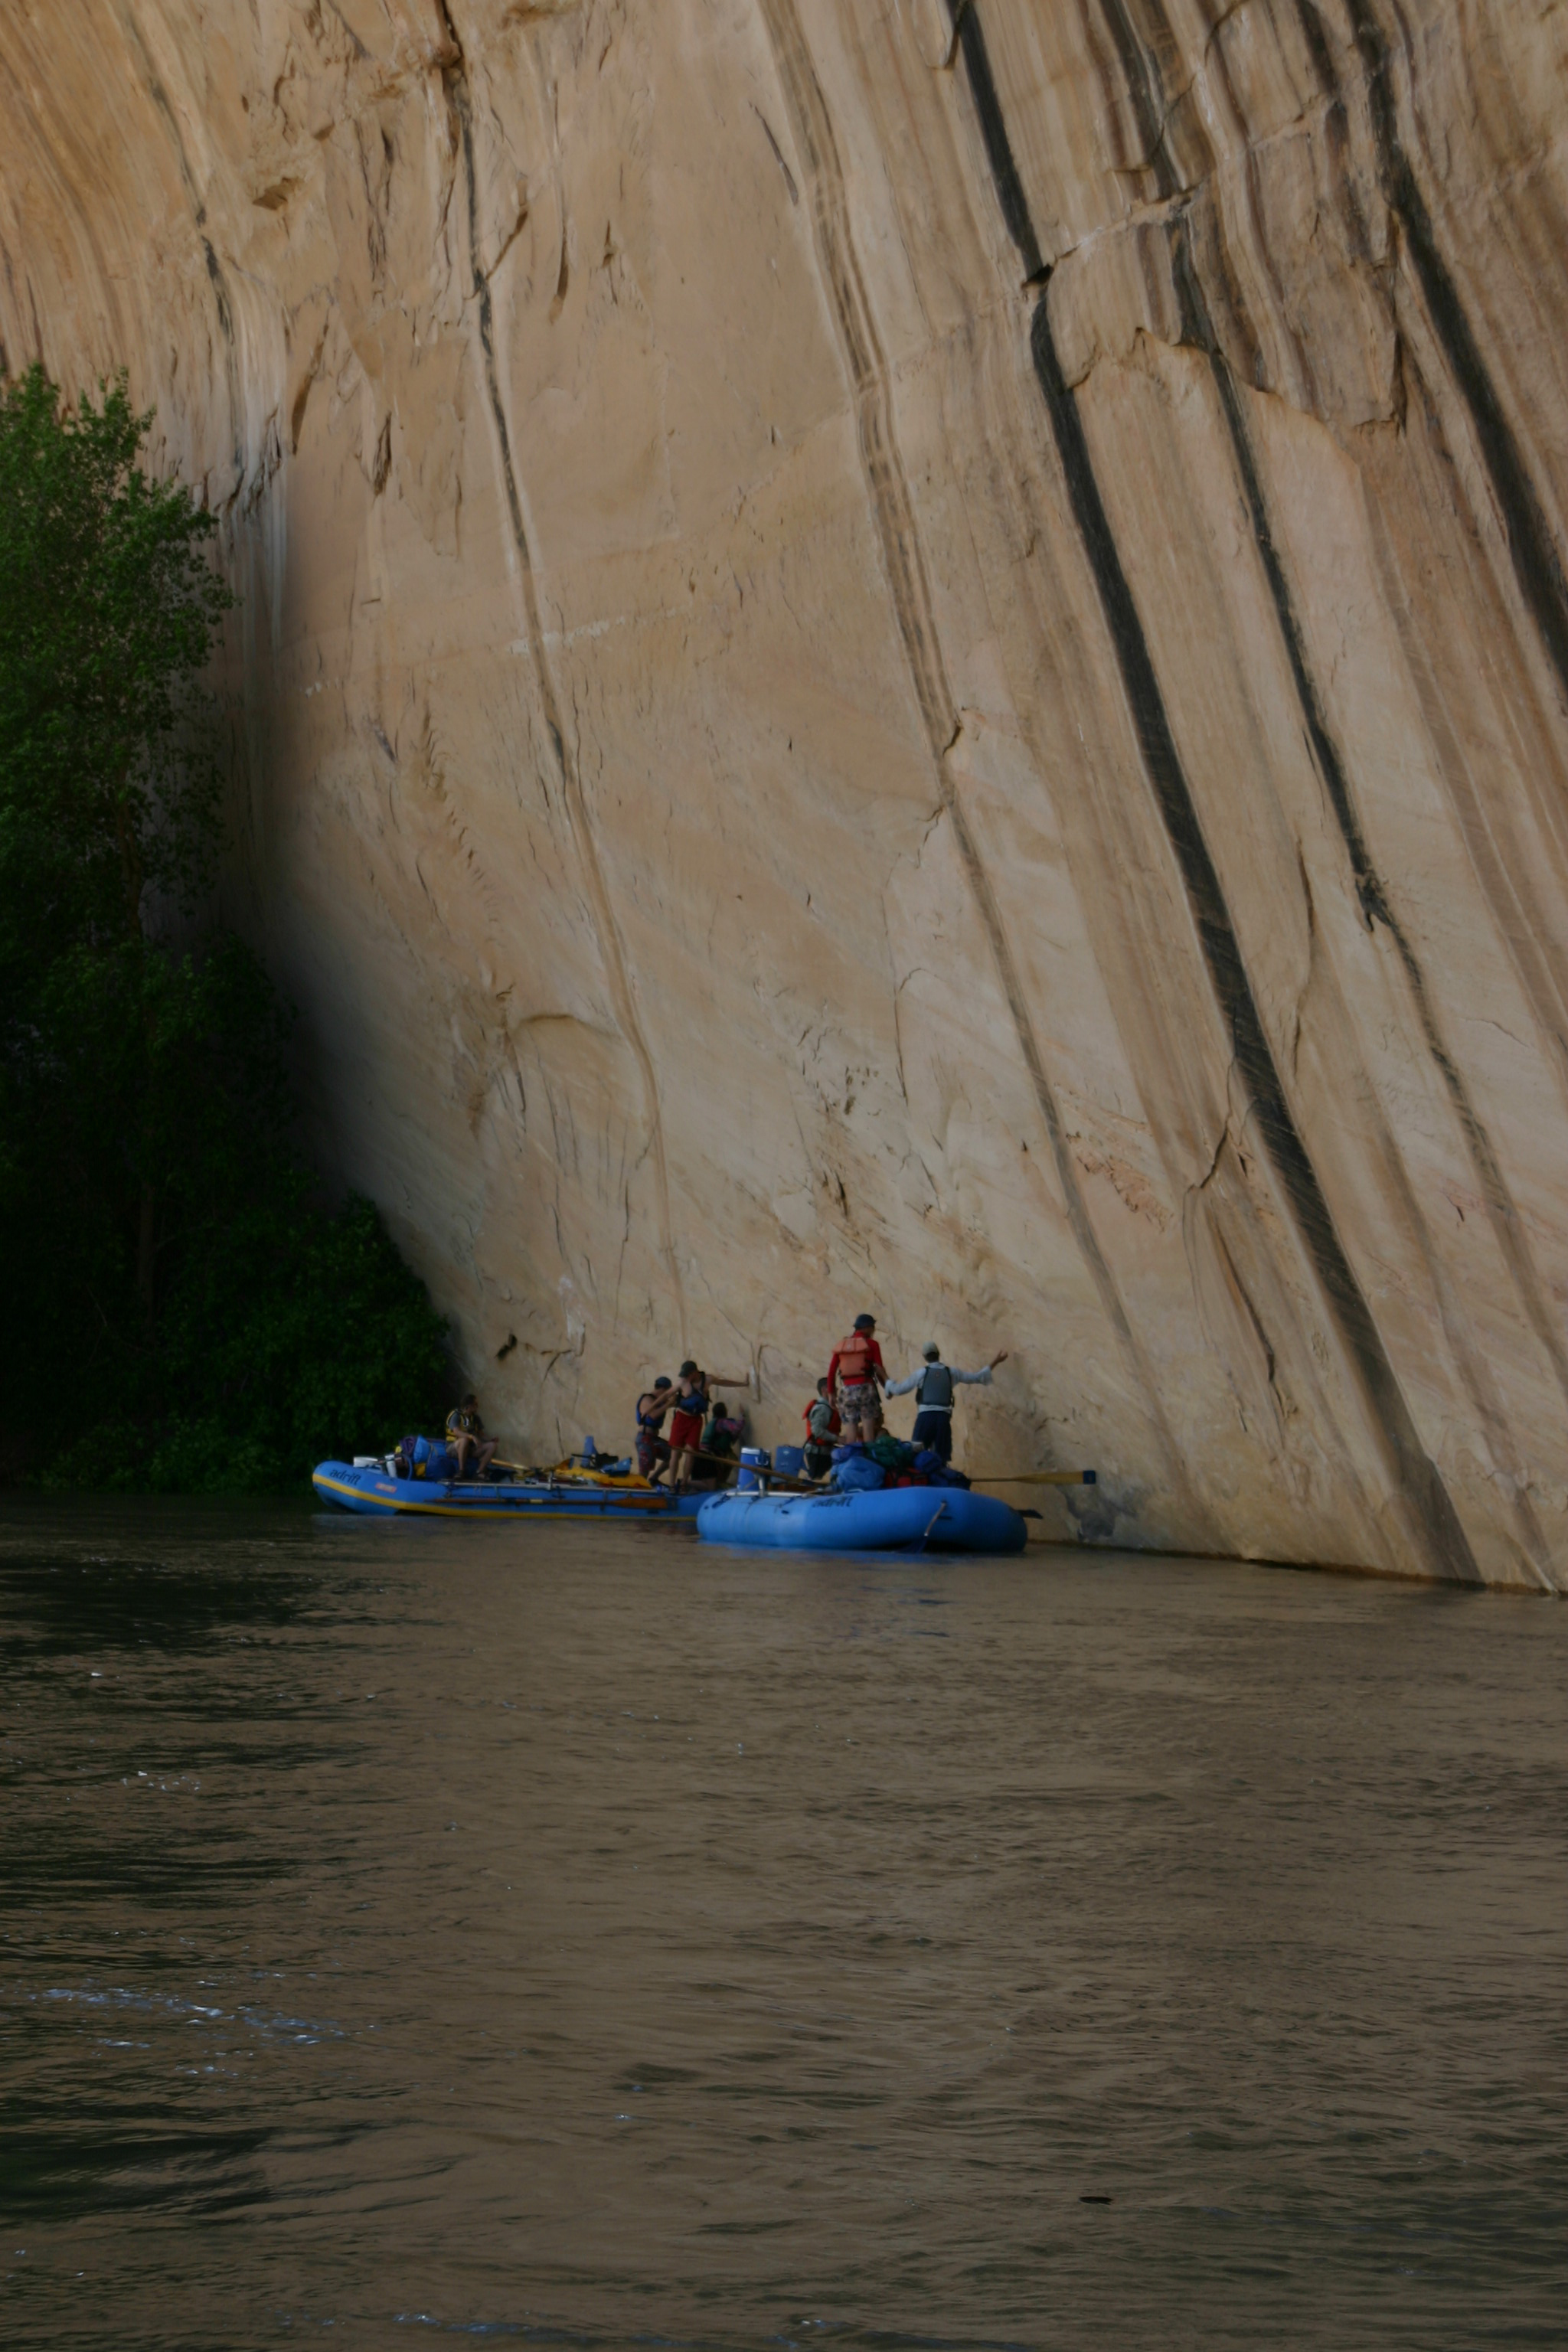 Tiger Wall on the Yampa River in Dinosaur National Monument.